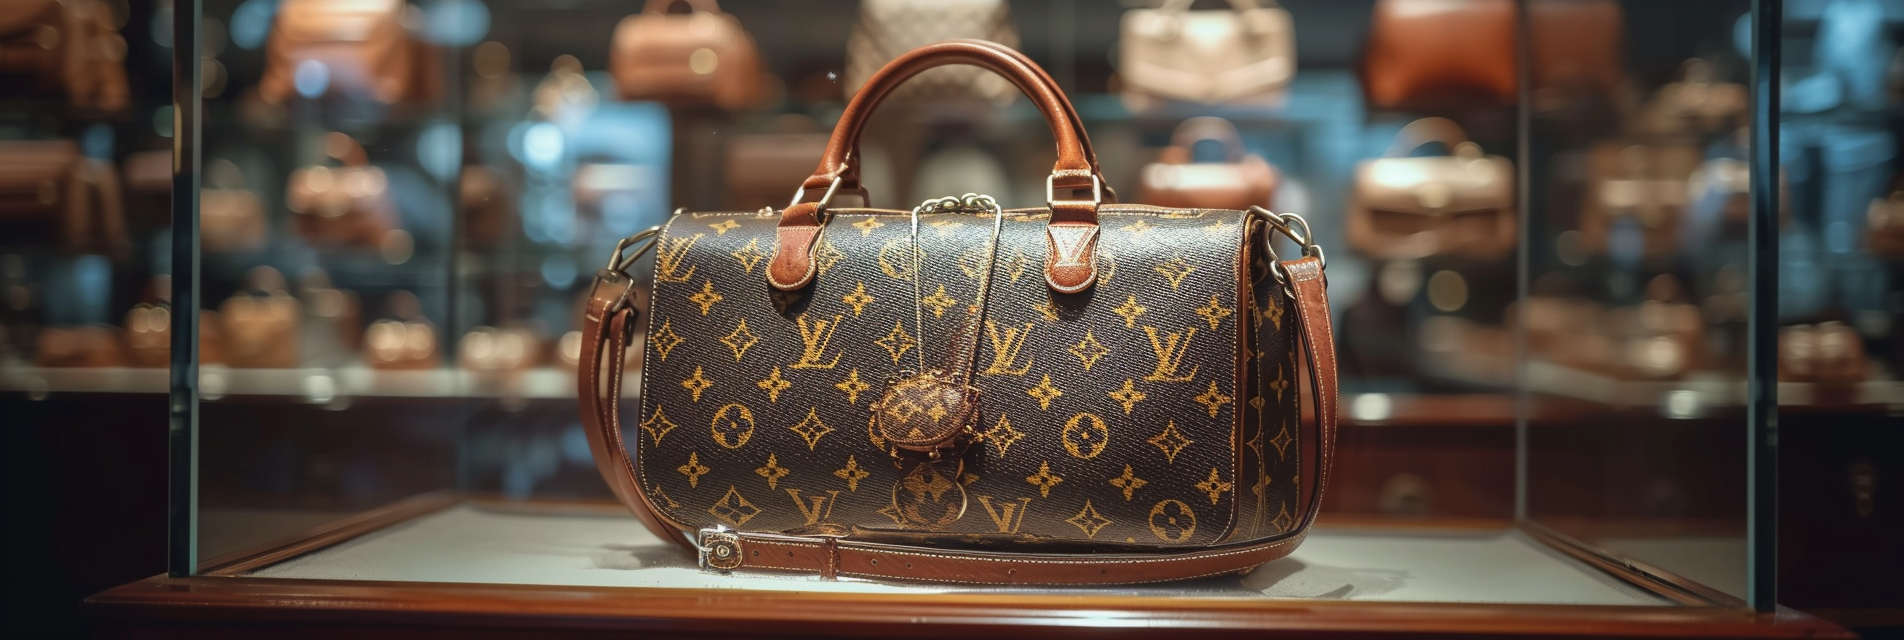 Elegance Personified: Louis Vuitton Handbags as the Ultimate Special Occasion Accessory